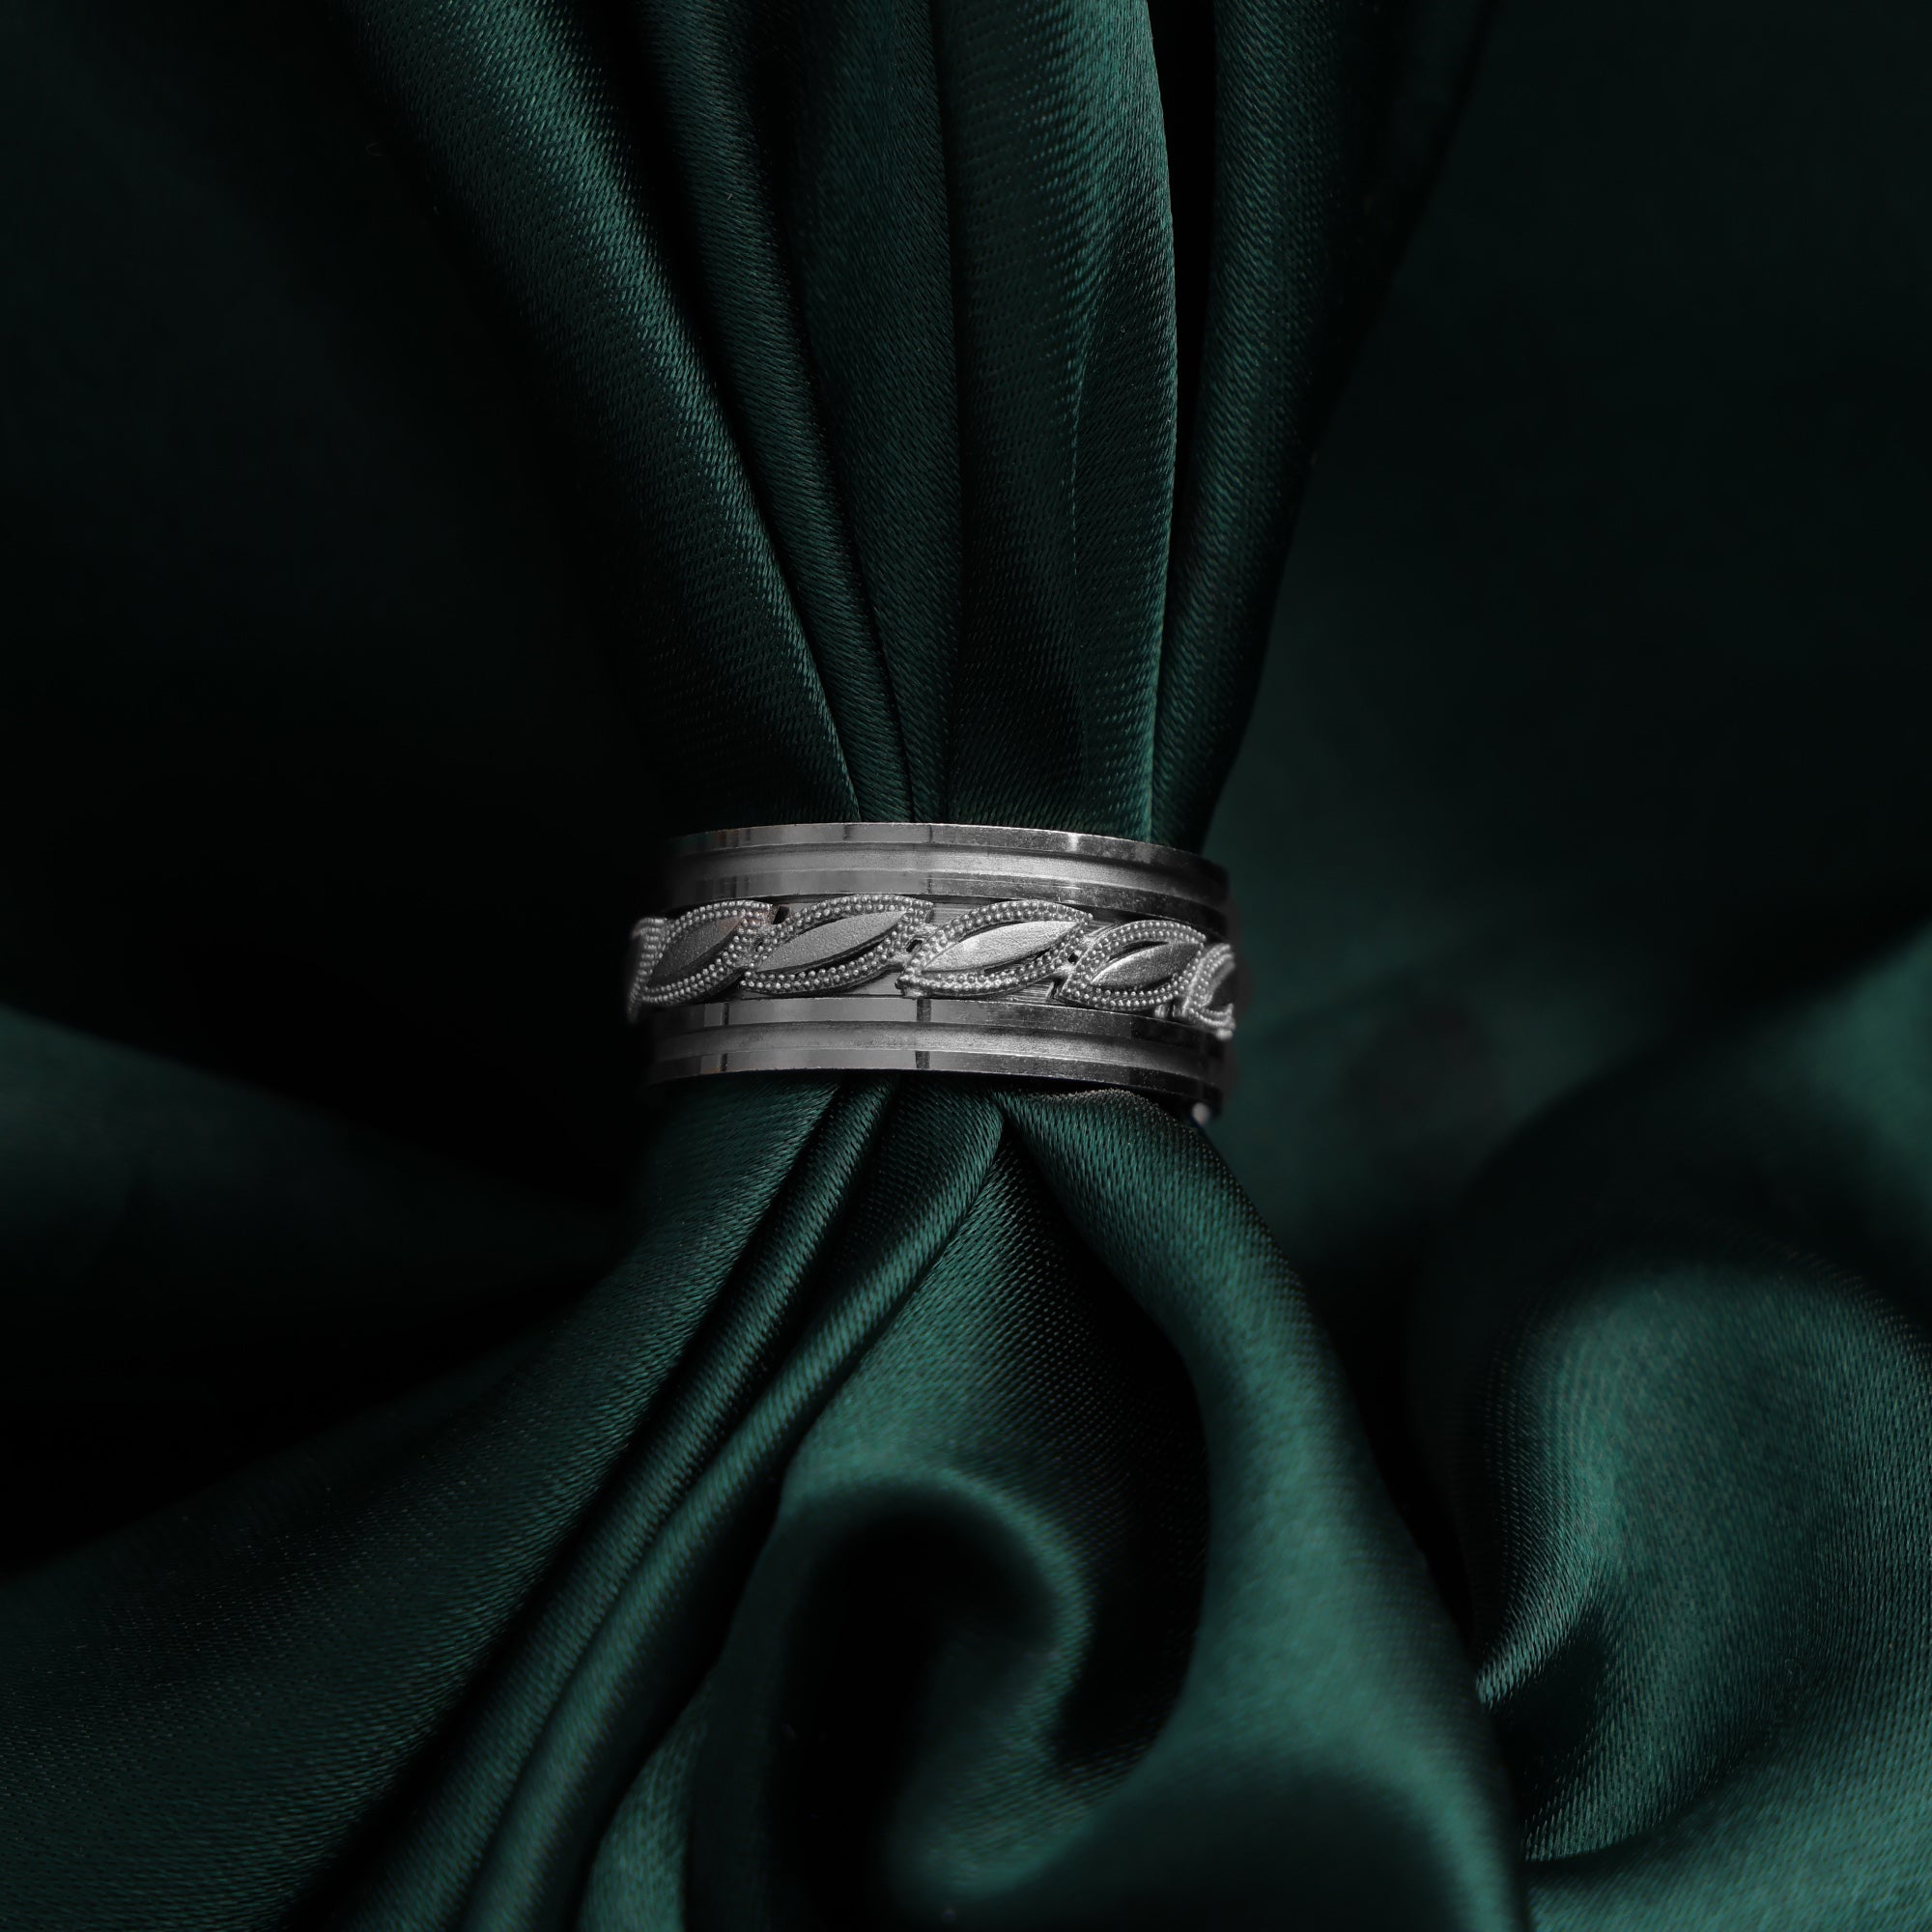 STERLING SILVER OXIDIZED BAND RING